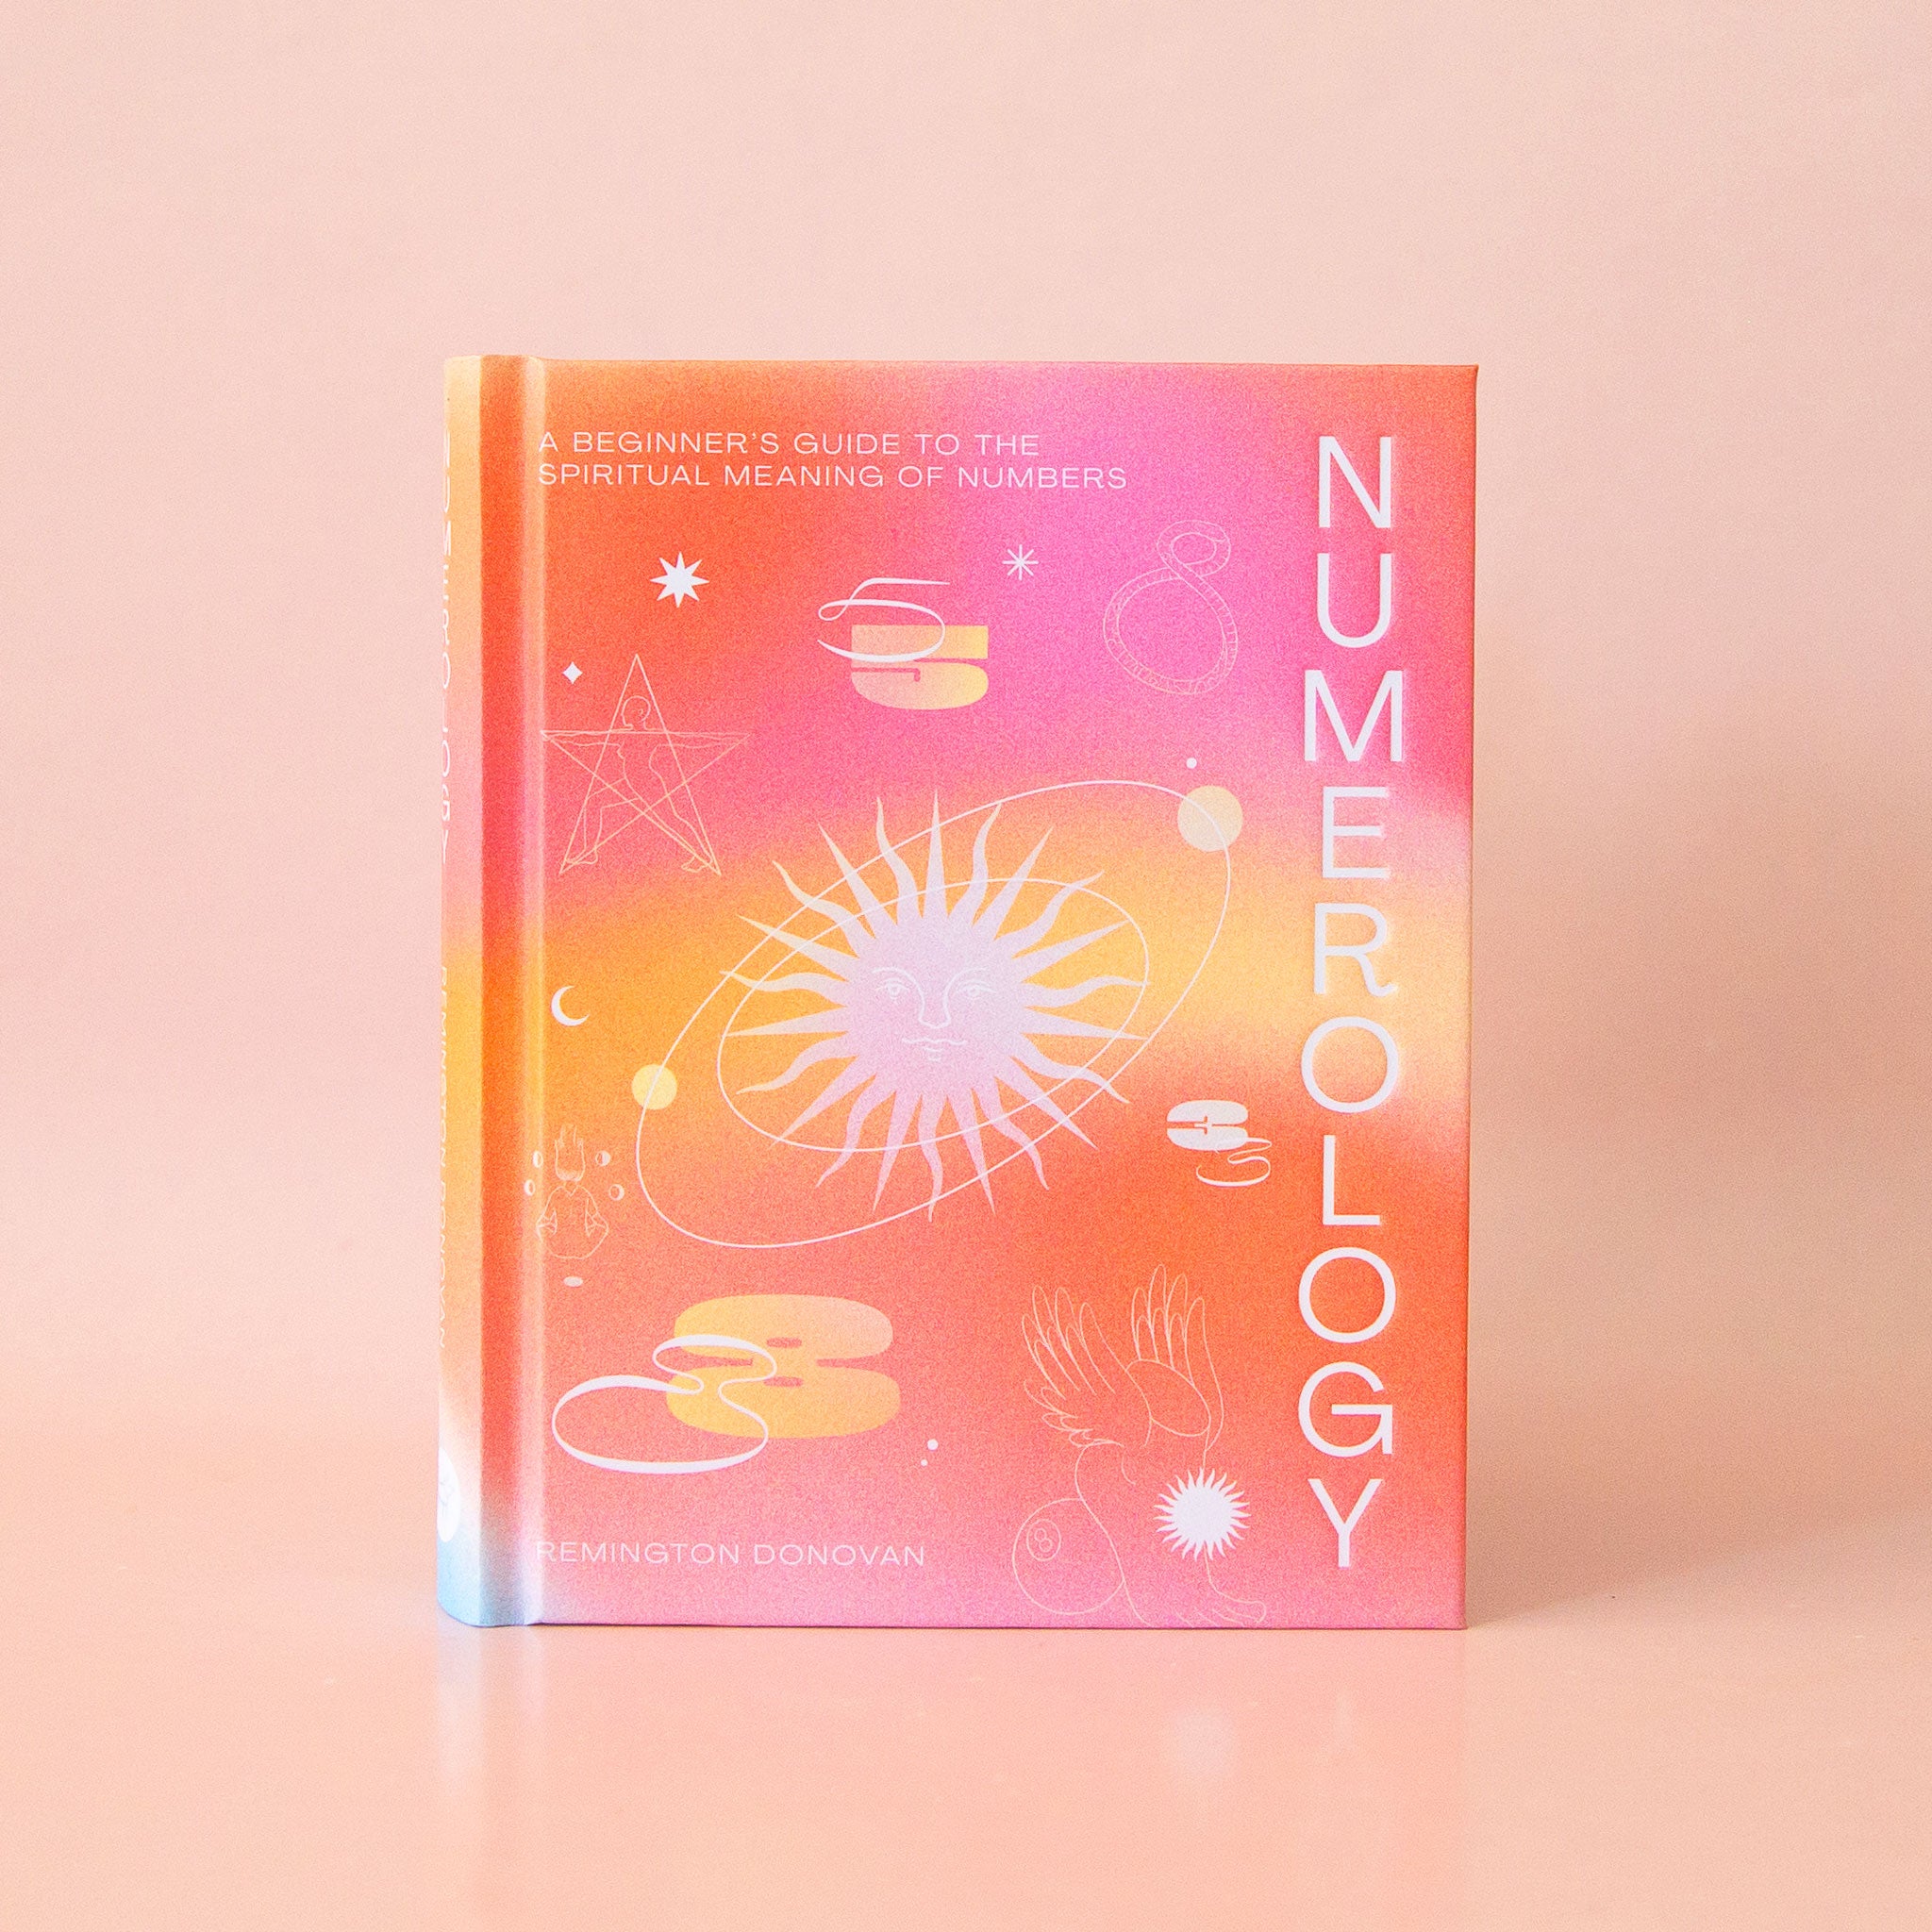 On a peachy background is a hot pink and orange book with a white title running vertically down the right side that reads, "Numerology", "A Beginner's Guide To The Spiritual Meaning of Numbers".